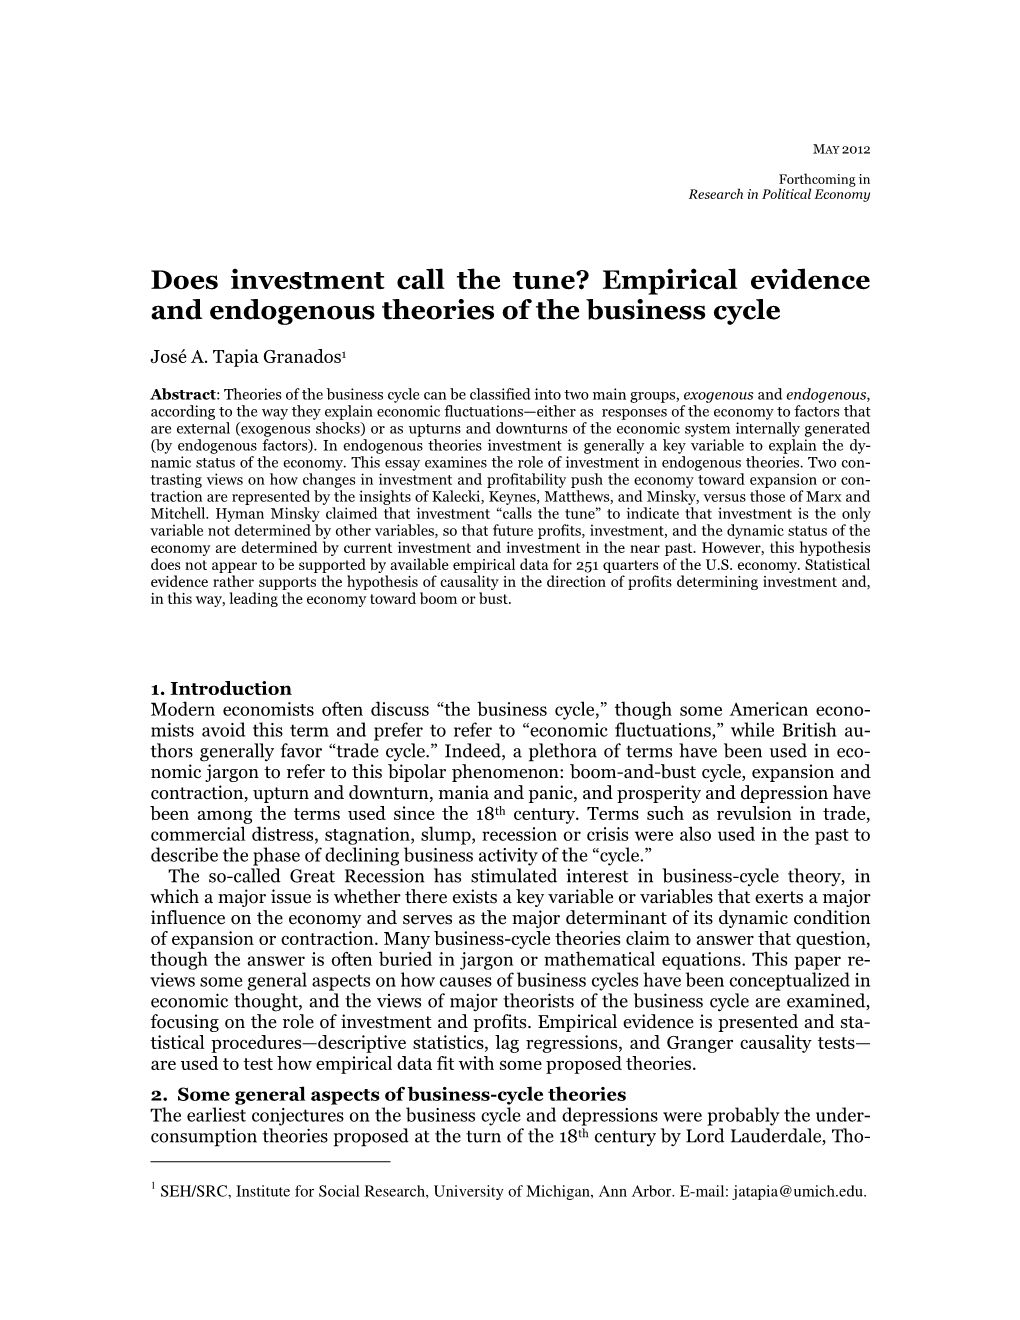 Does Investment Call the Tune? Empirical Evidence and Endogenous Theories of the Business Cycle